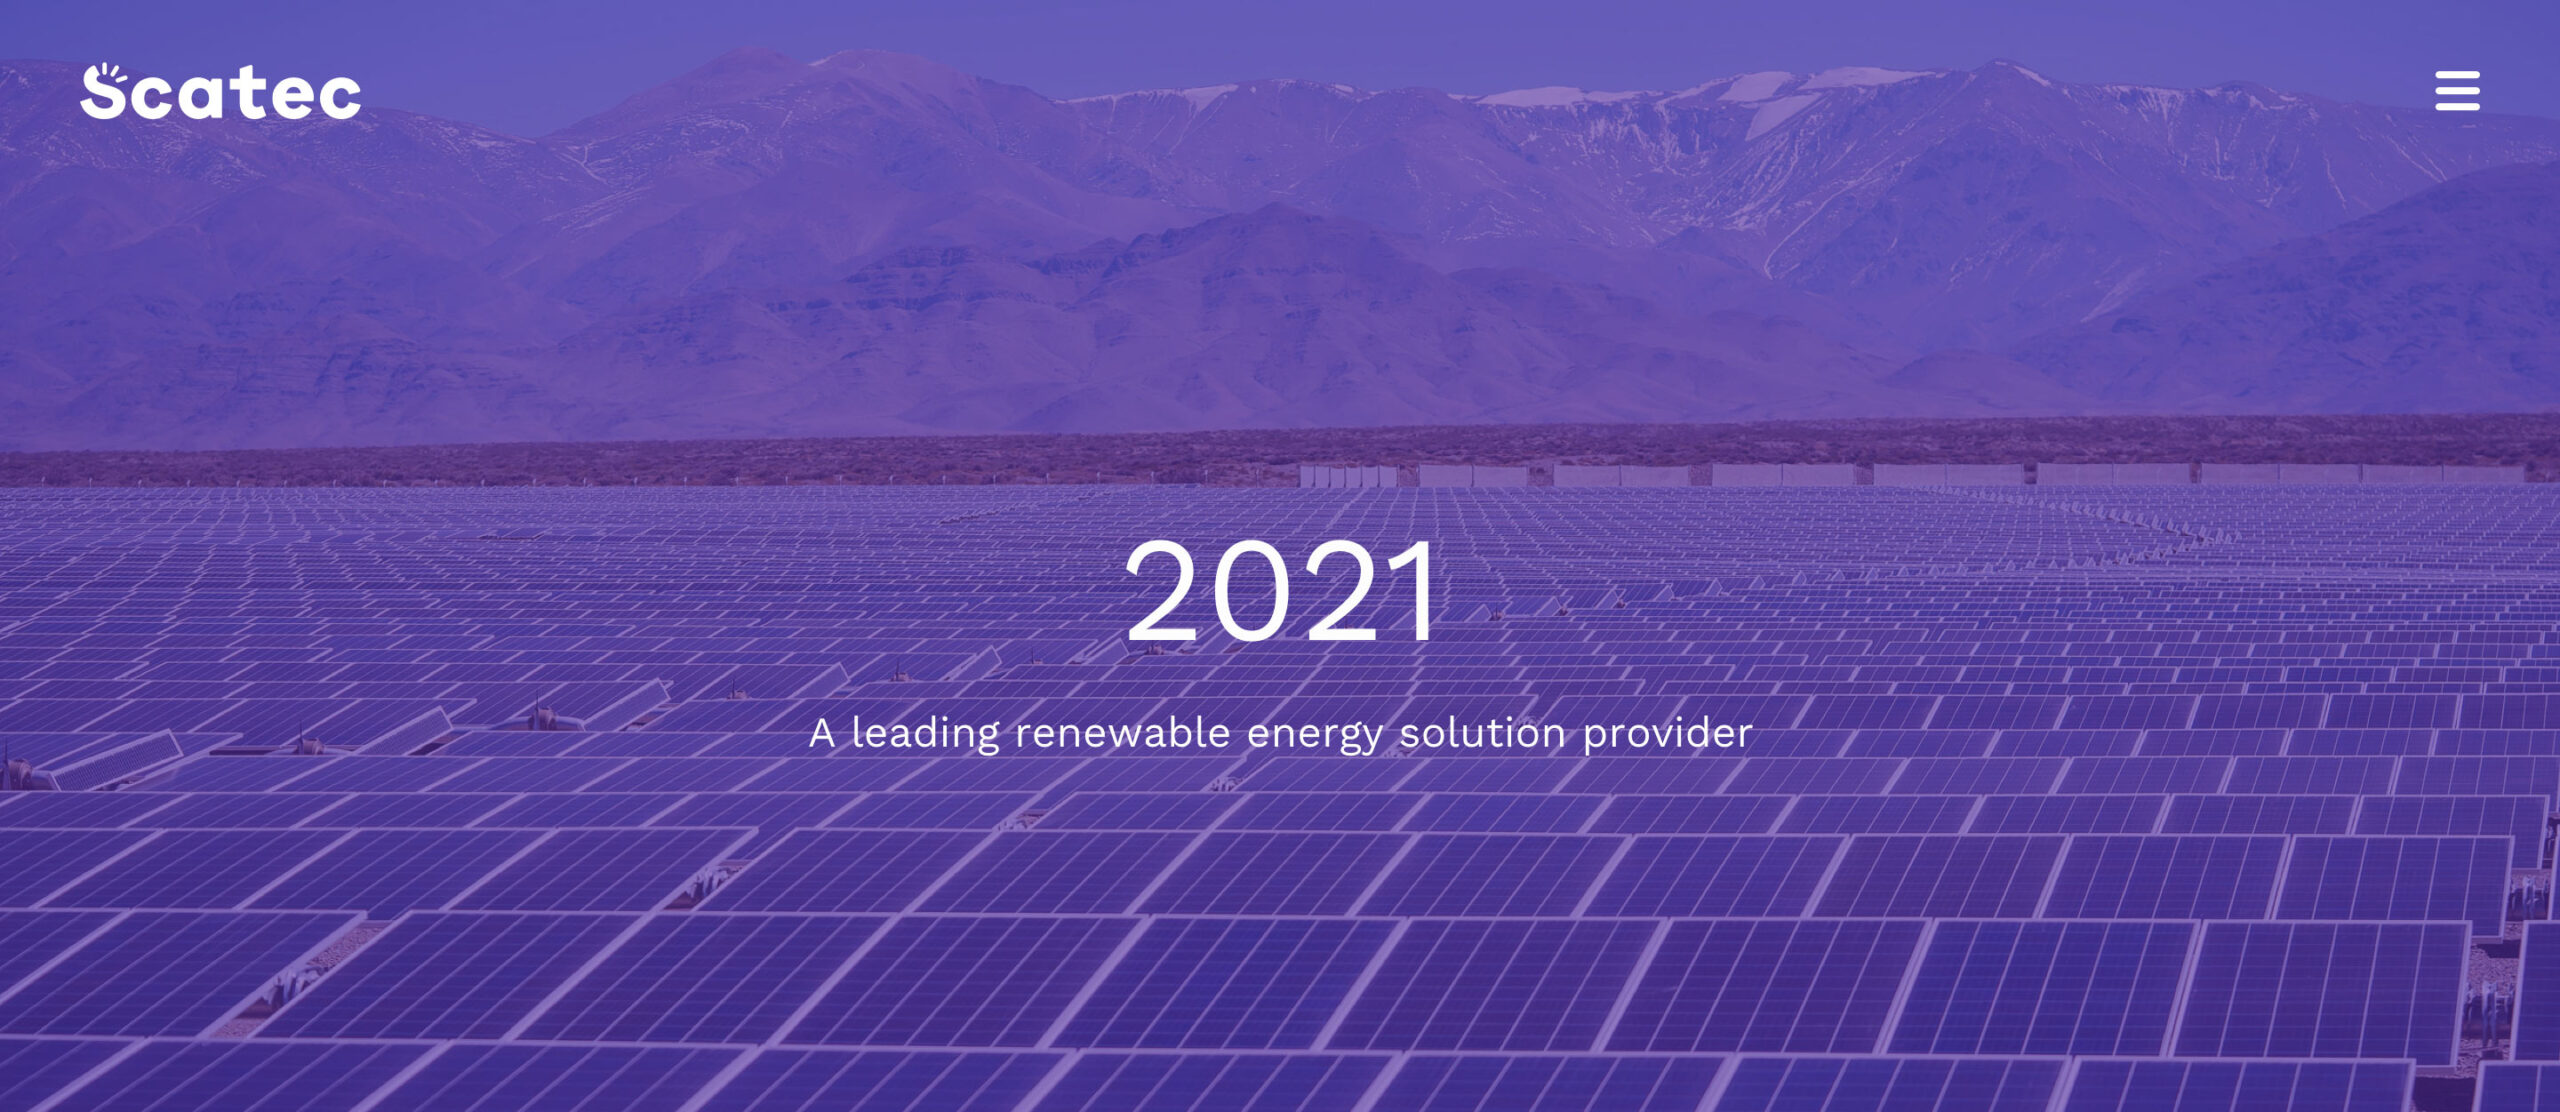 Scatec 2021 A leading renewable energy solution provider